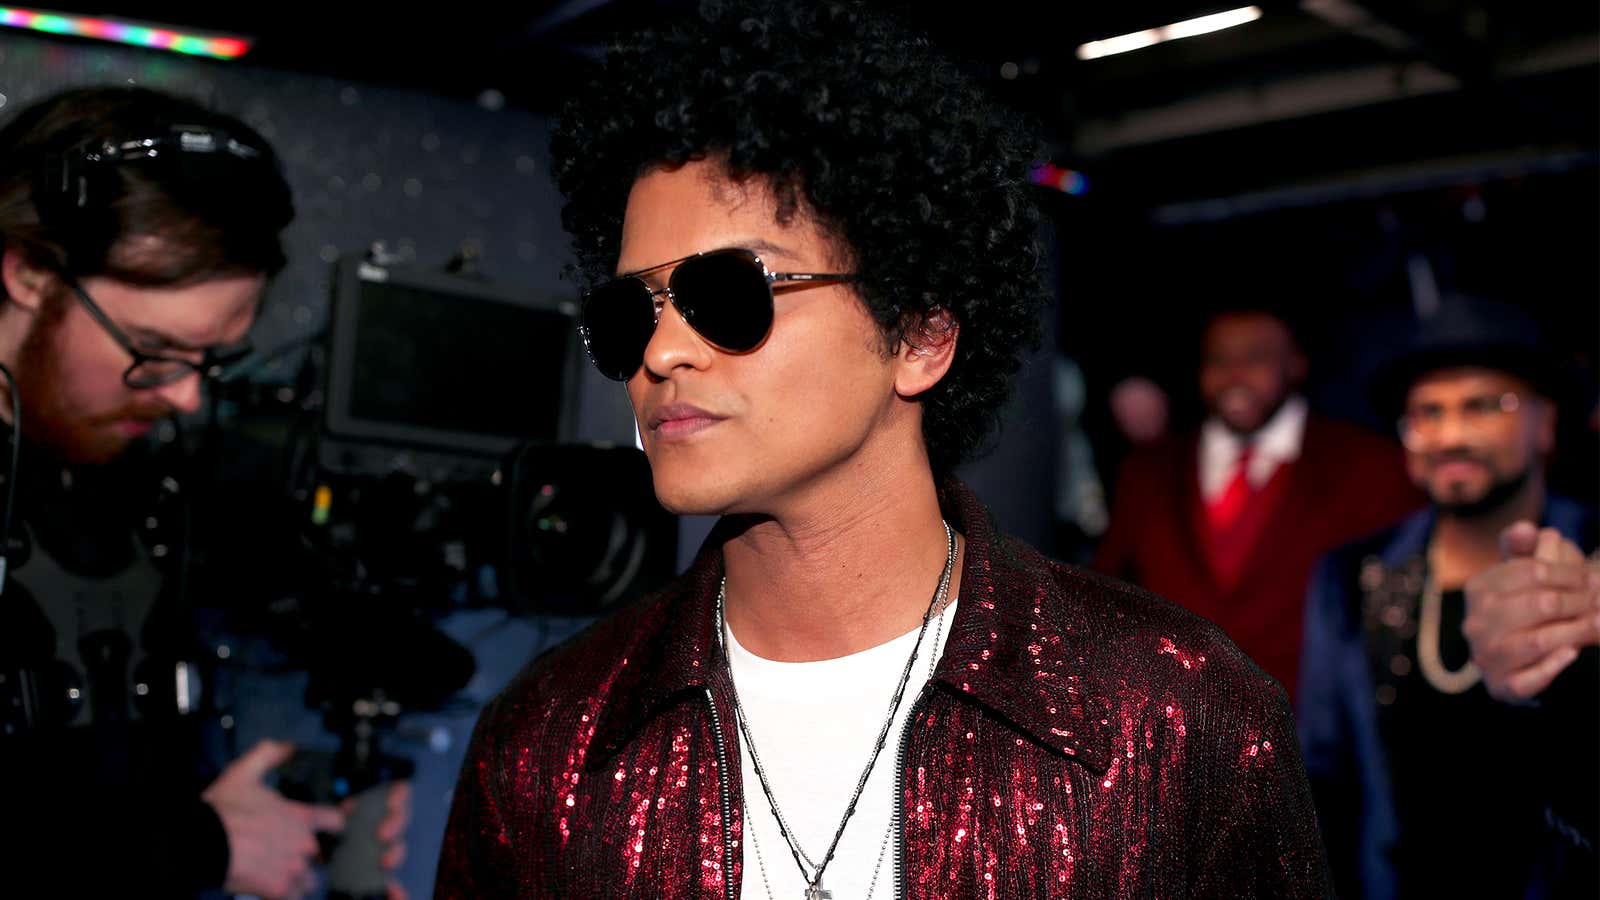 Image for Bruno Mars Reportedly In $50 Million Of Debt With MGM Casino After Assuming Cocktails Were Complimentary